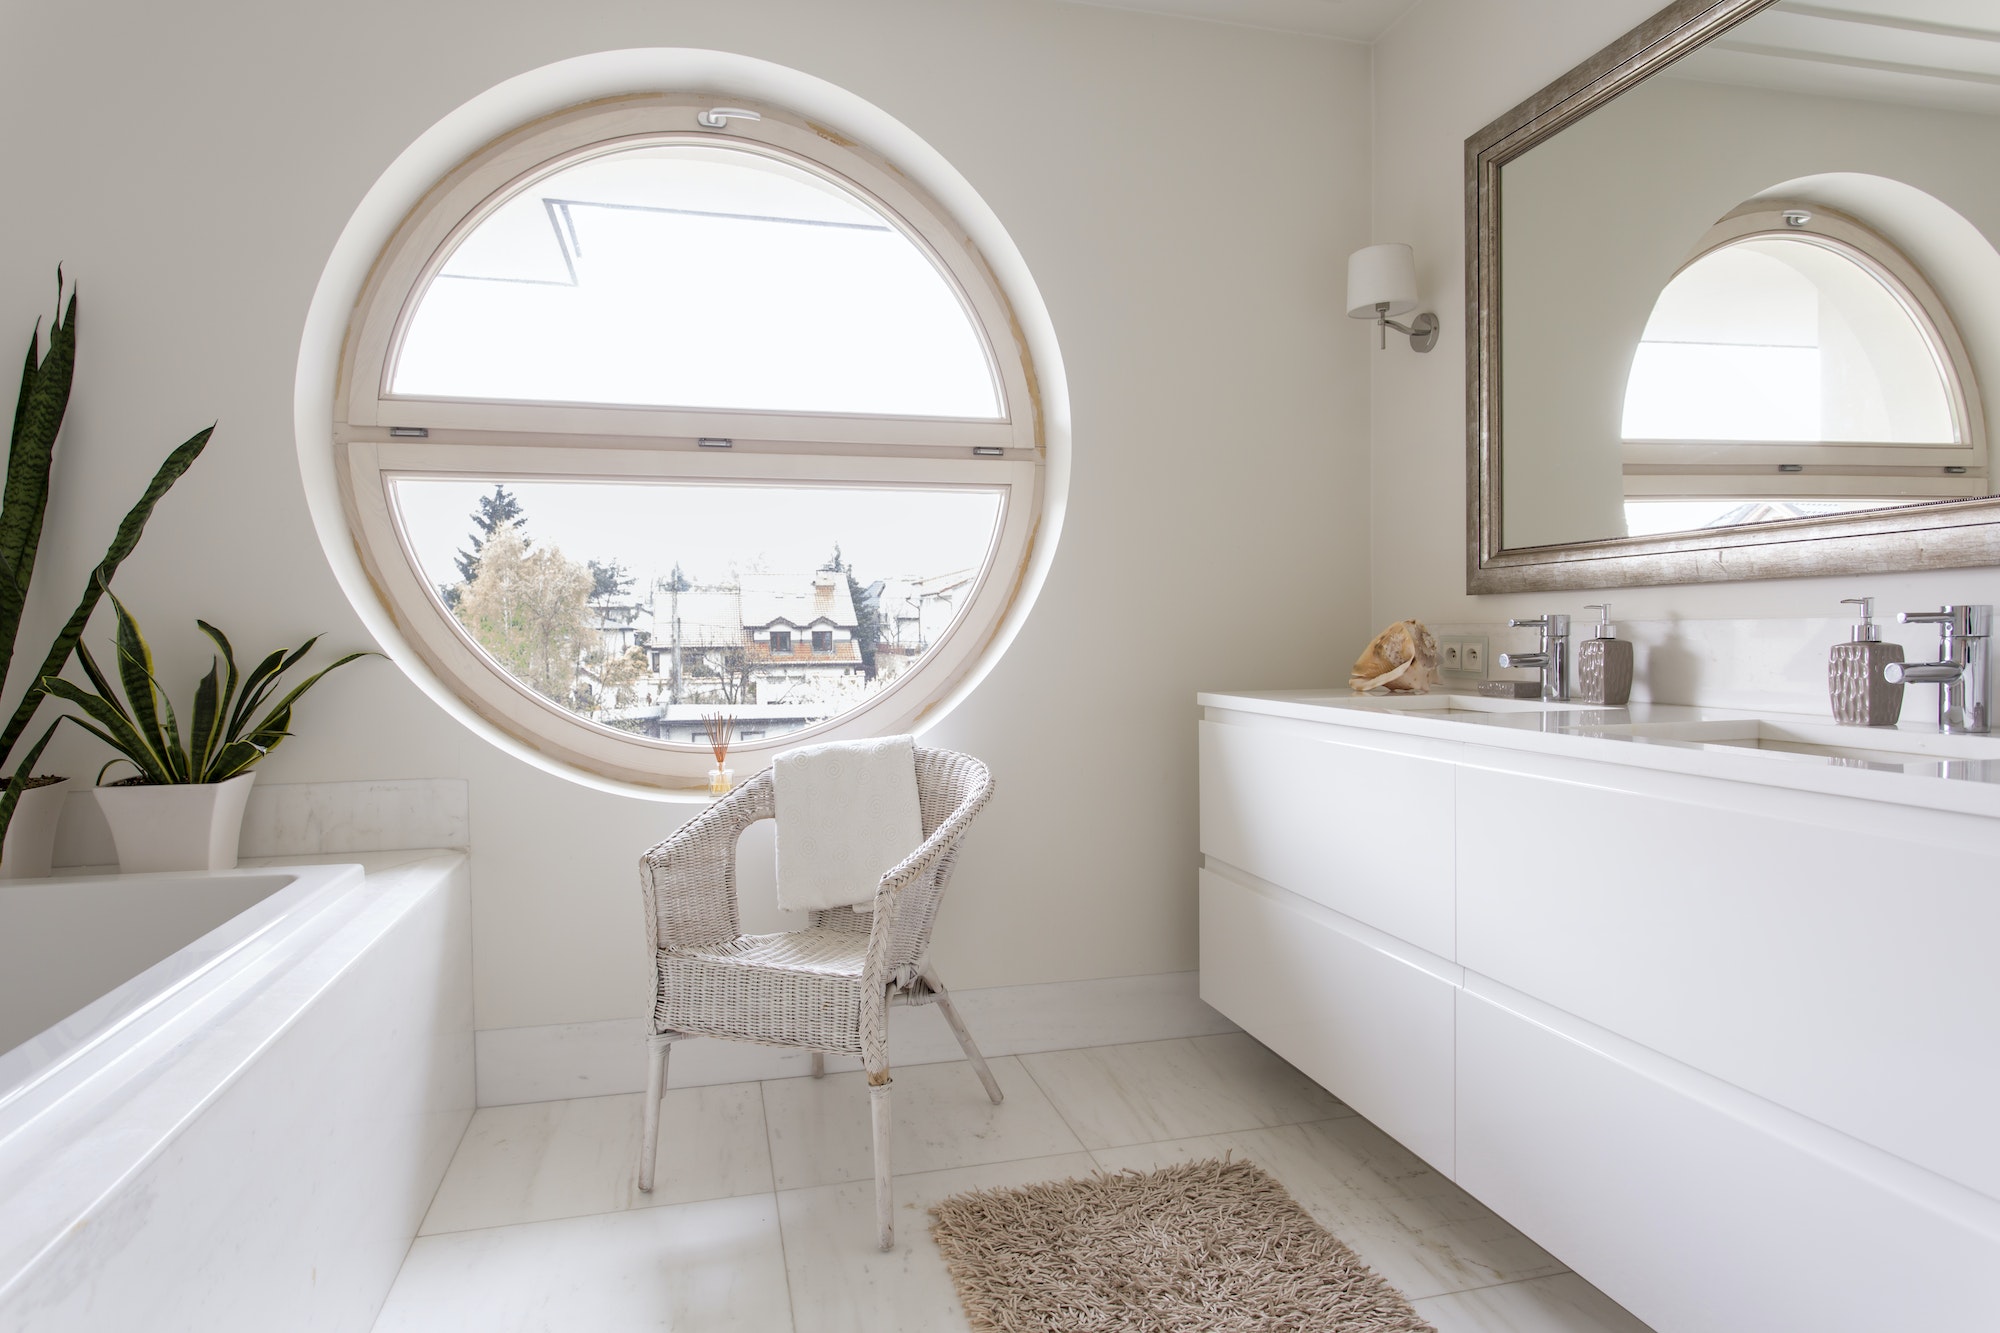 10 White Bathroom Designs In Minimalist Style with Tons of Natural Lights Just Like A True Oasis